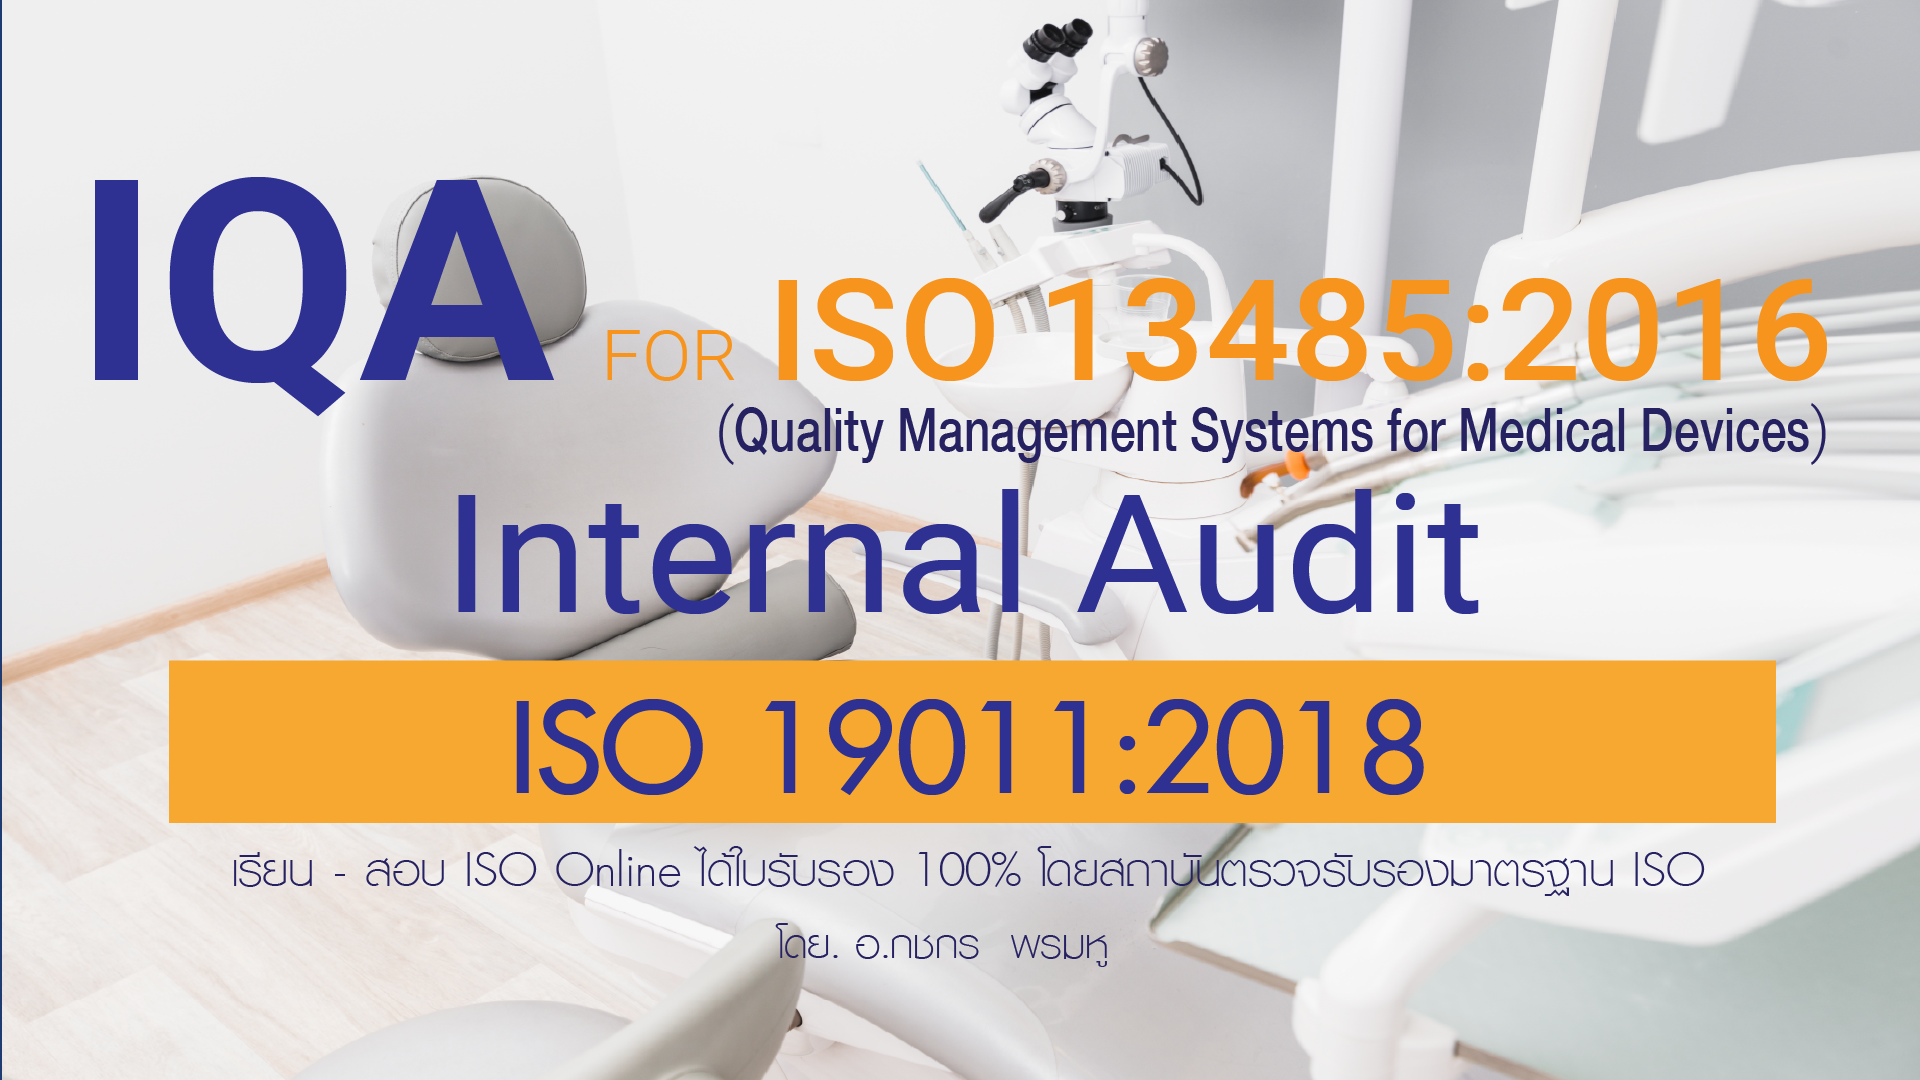 IQA for ISO 13485:2016